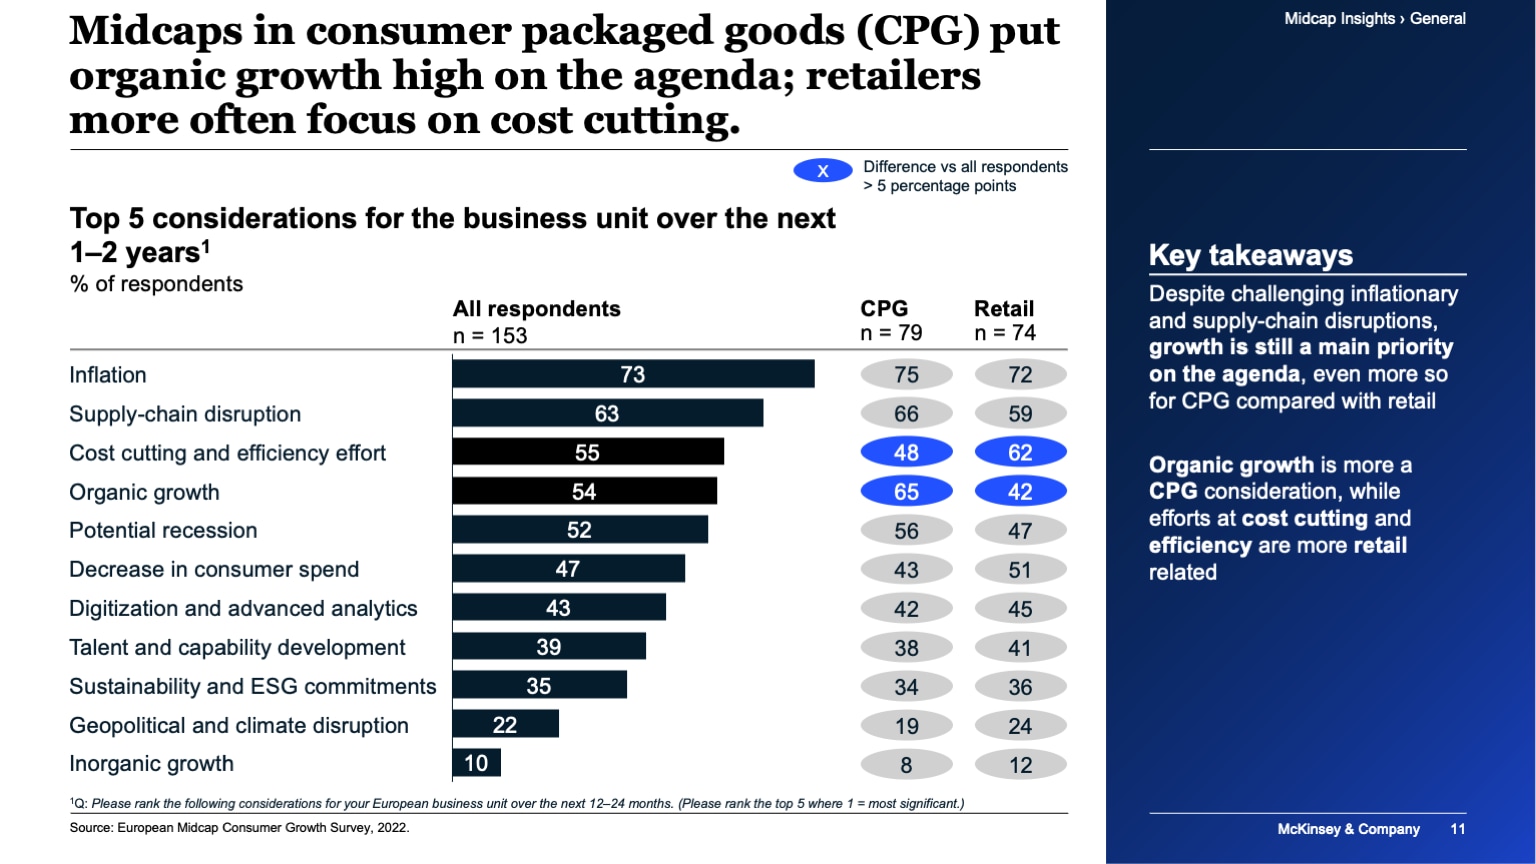 Midcaps in consumer packaged goods (CPG) put organic growth high on the agenda; retailers more often focus on cost cutting.